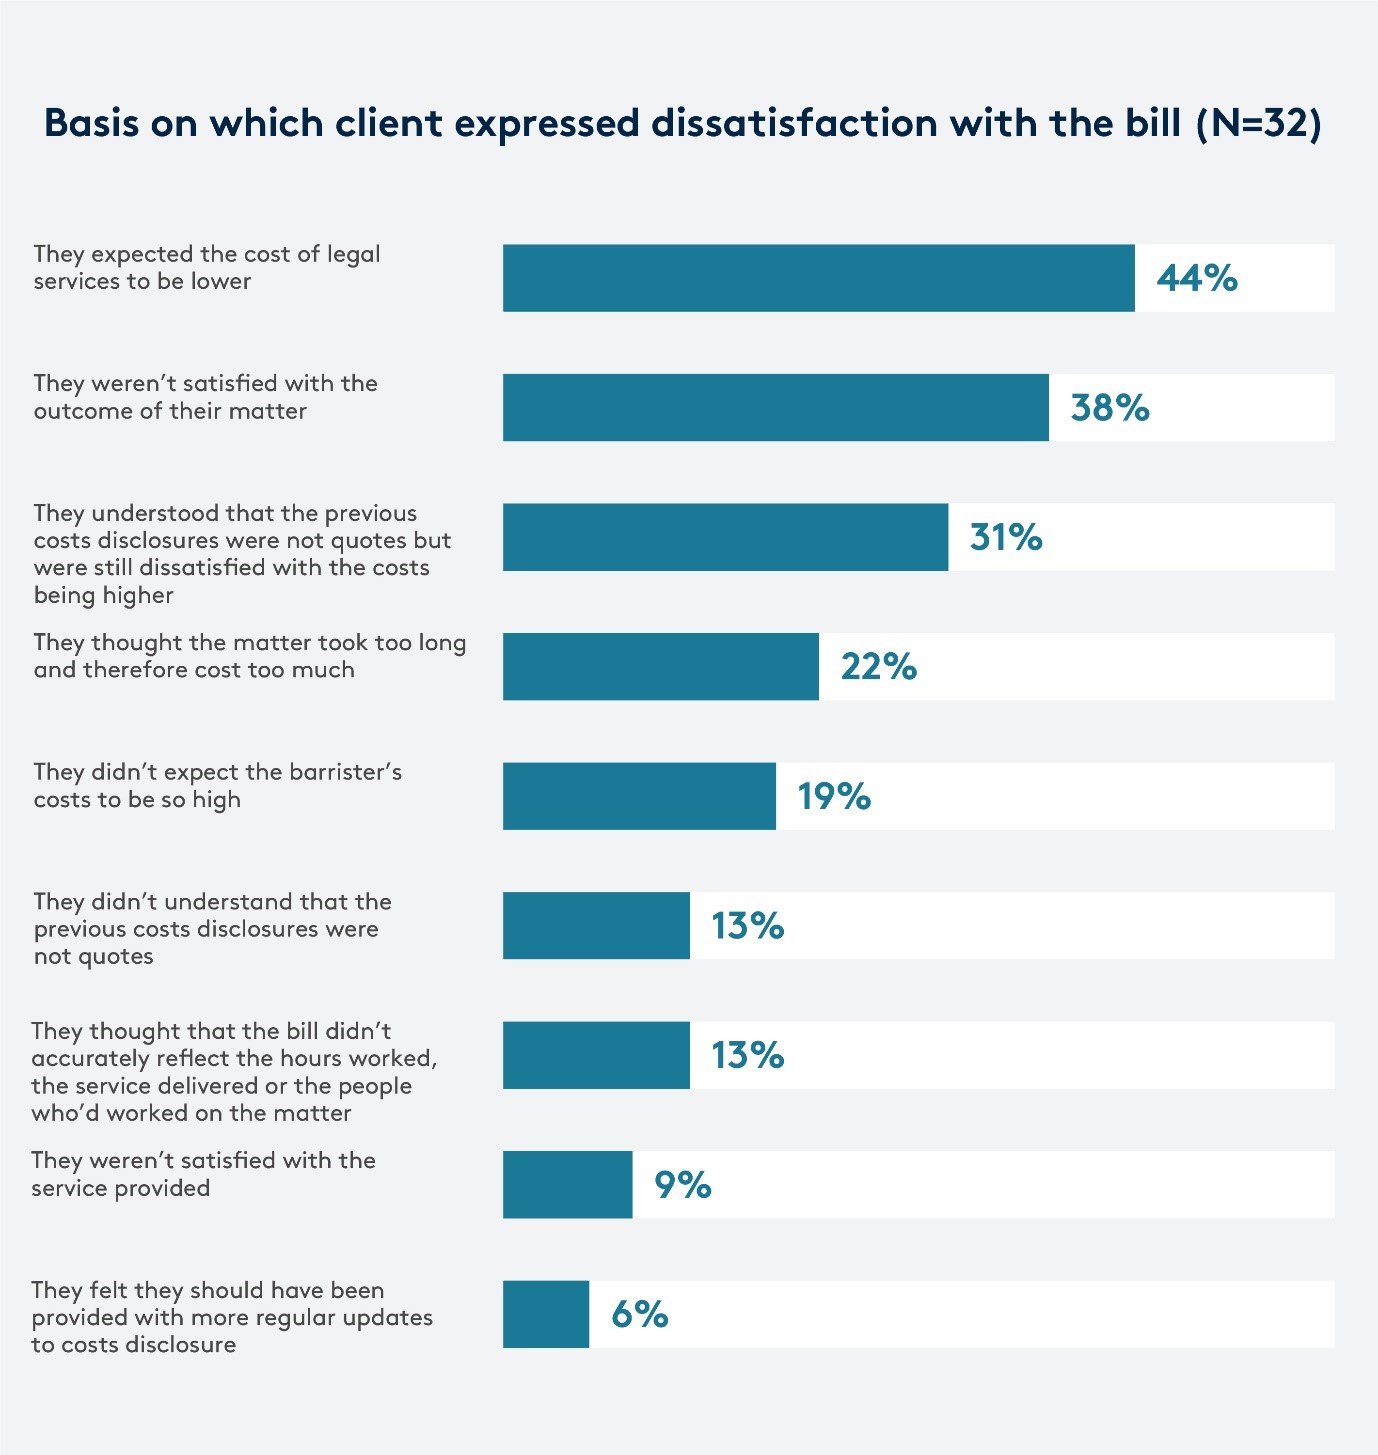 Basis on which client expressed dissatisfaction with the bill 